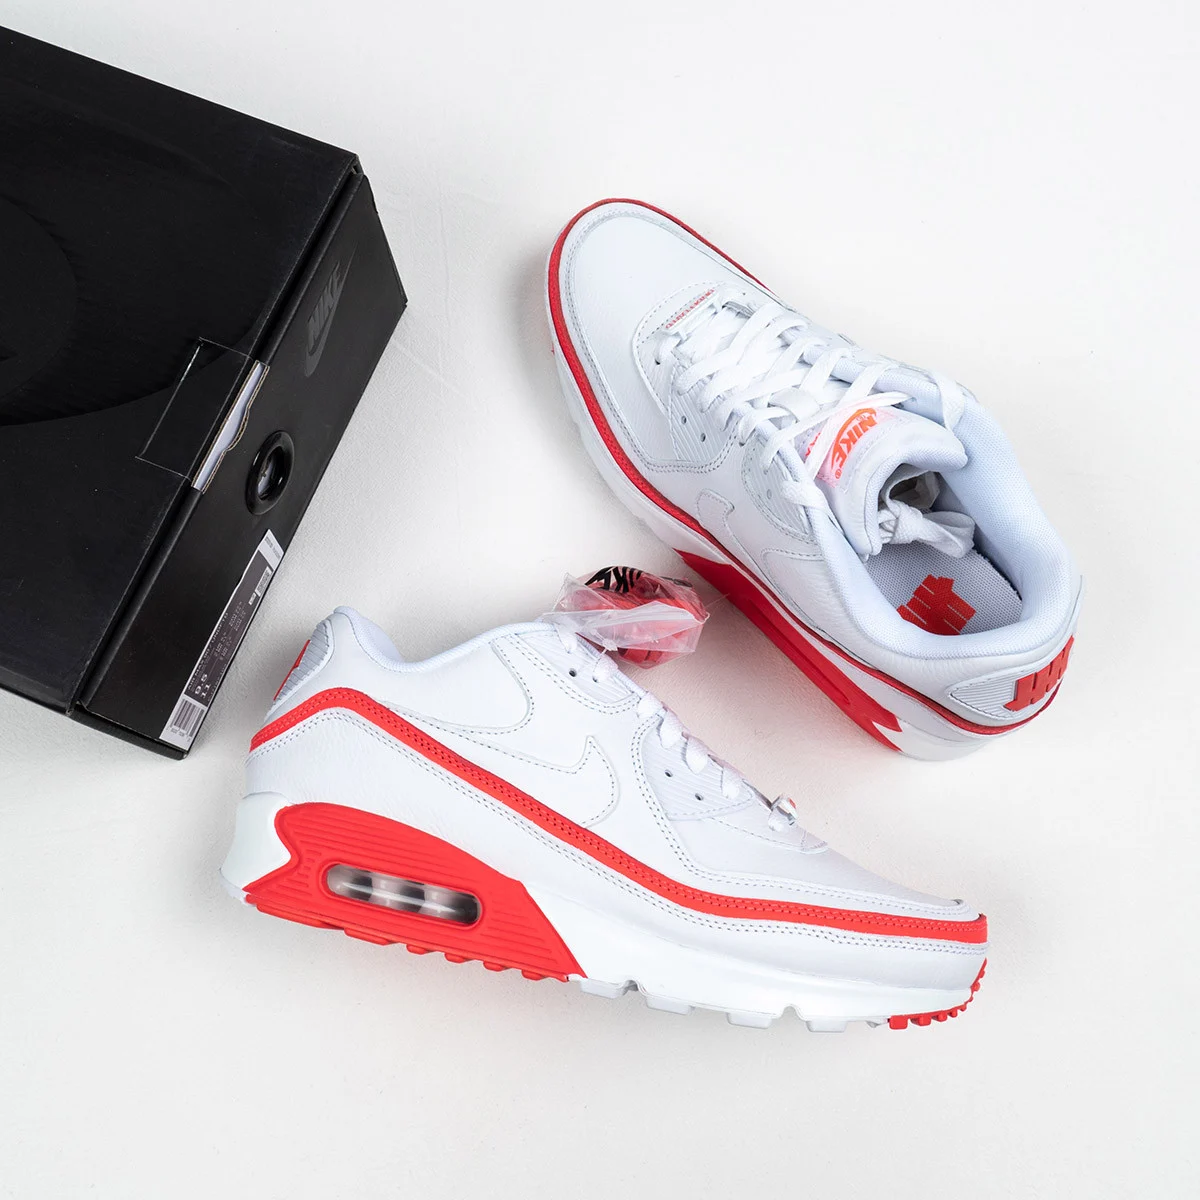 Undefeated x Nike Air Max 90 White Solar Red For Sale